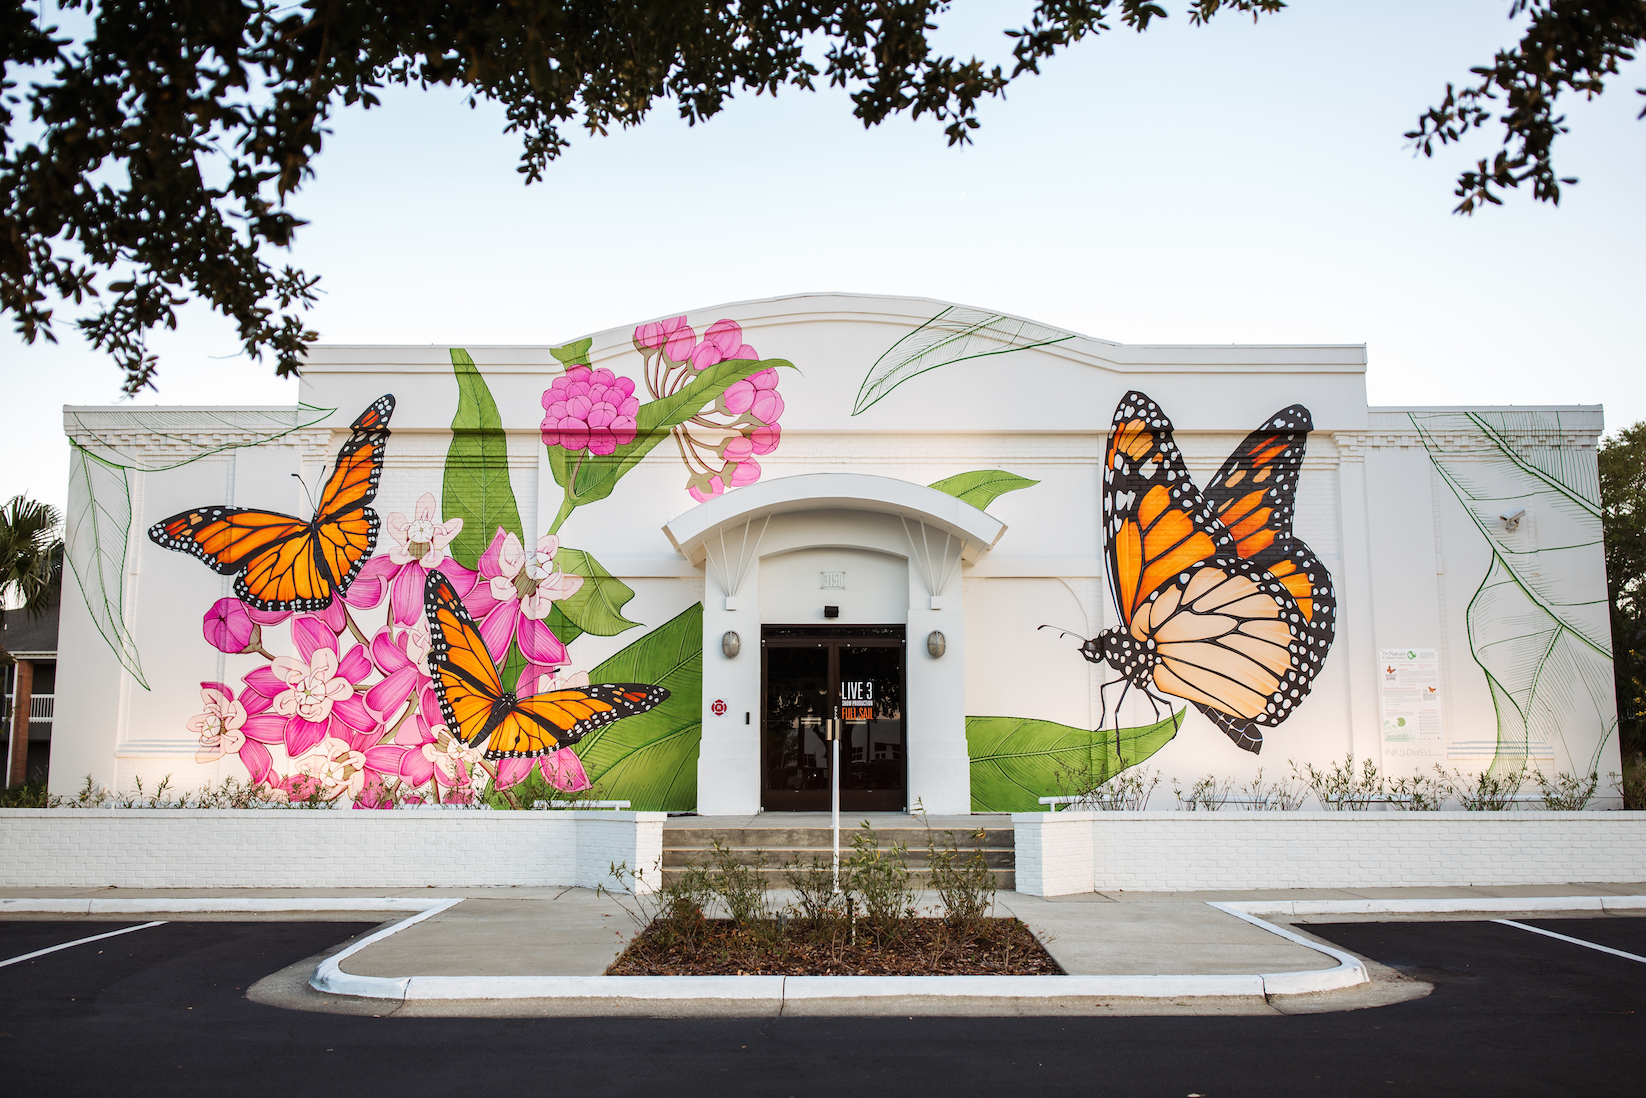 This mural, called "Milkweed Galaxy", features swamp milkweed and monarch butterflies at Full Sail University in Winter Park, Florida.